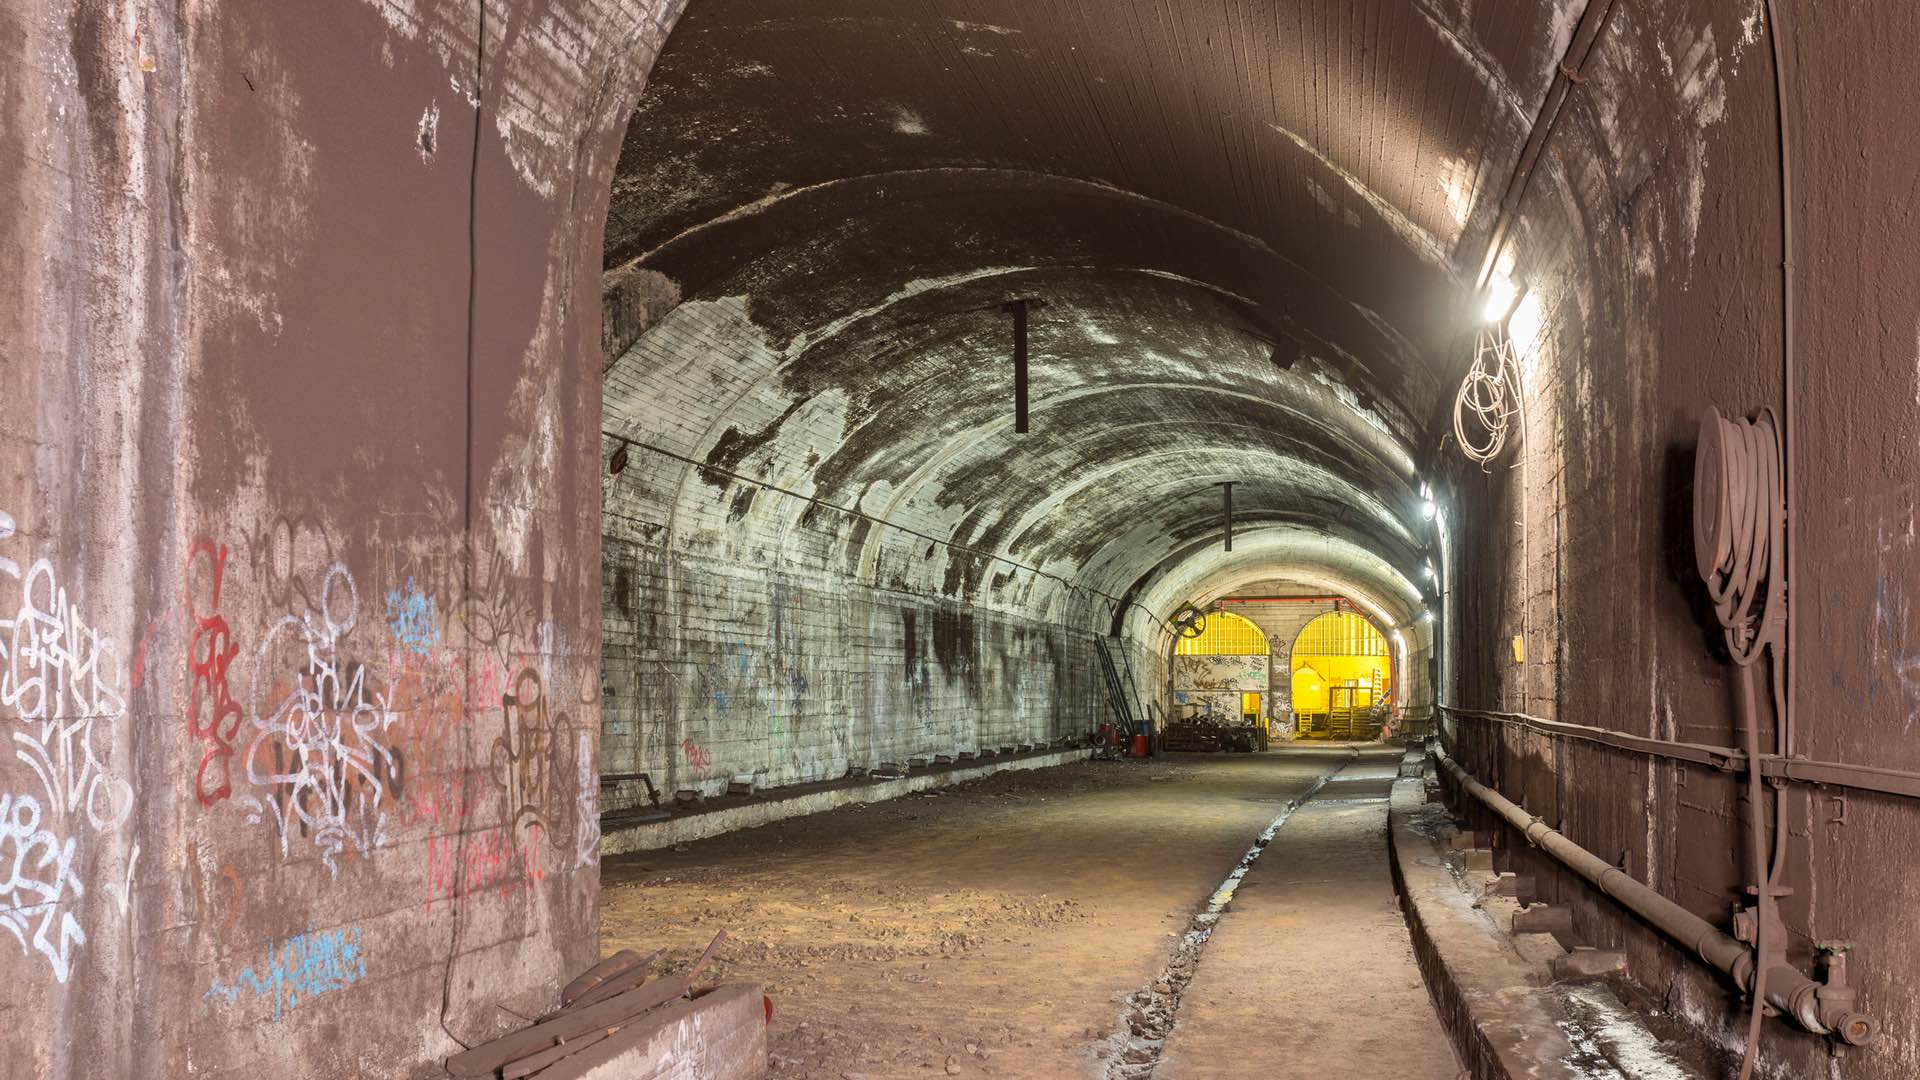 Sydney's Abandoned Underground St James Tunnels Could Be Opened Up to the Public